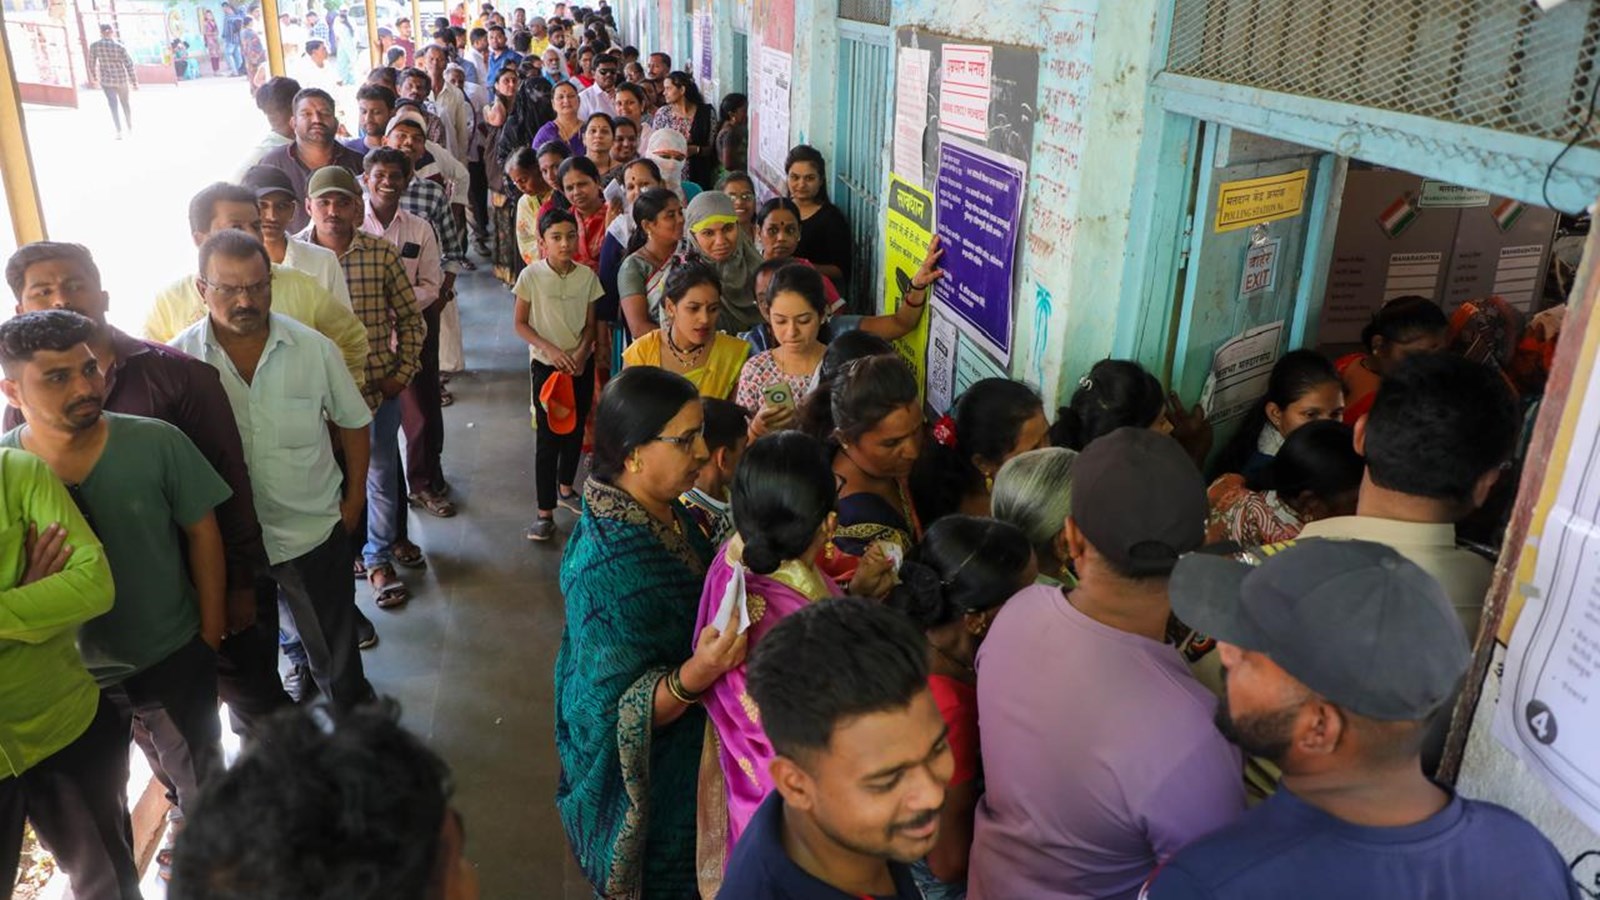 17.51 pc voter turnout in 11 constituencies in Maharashtra till 11 am